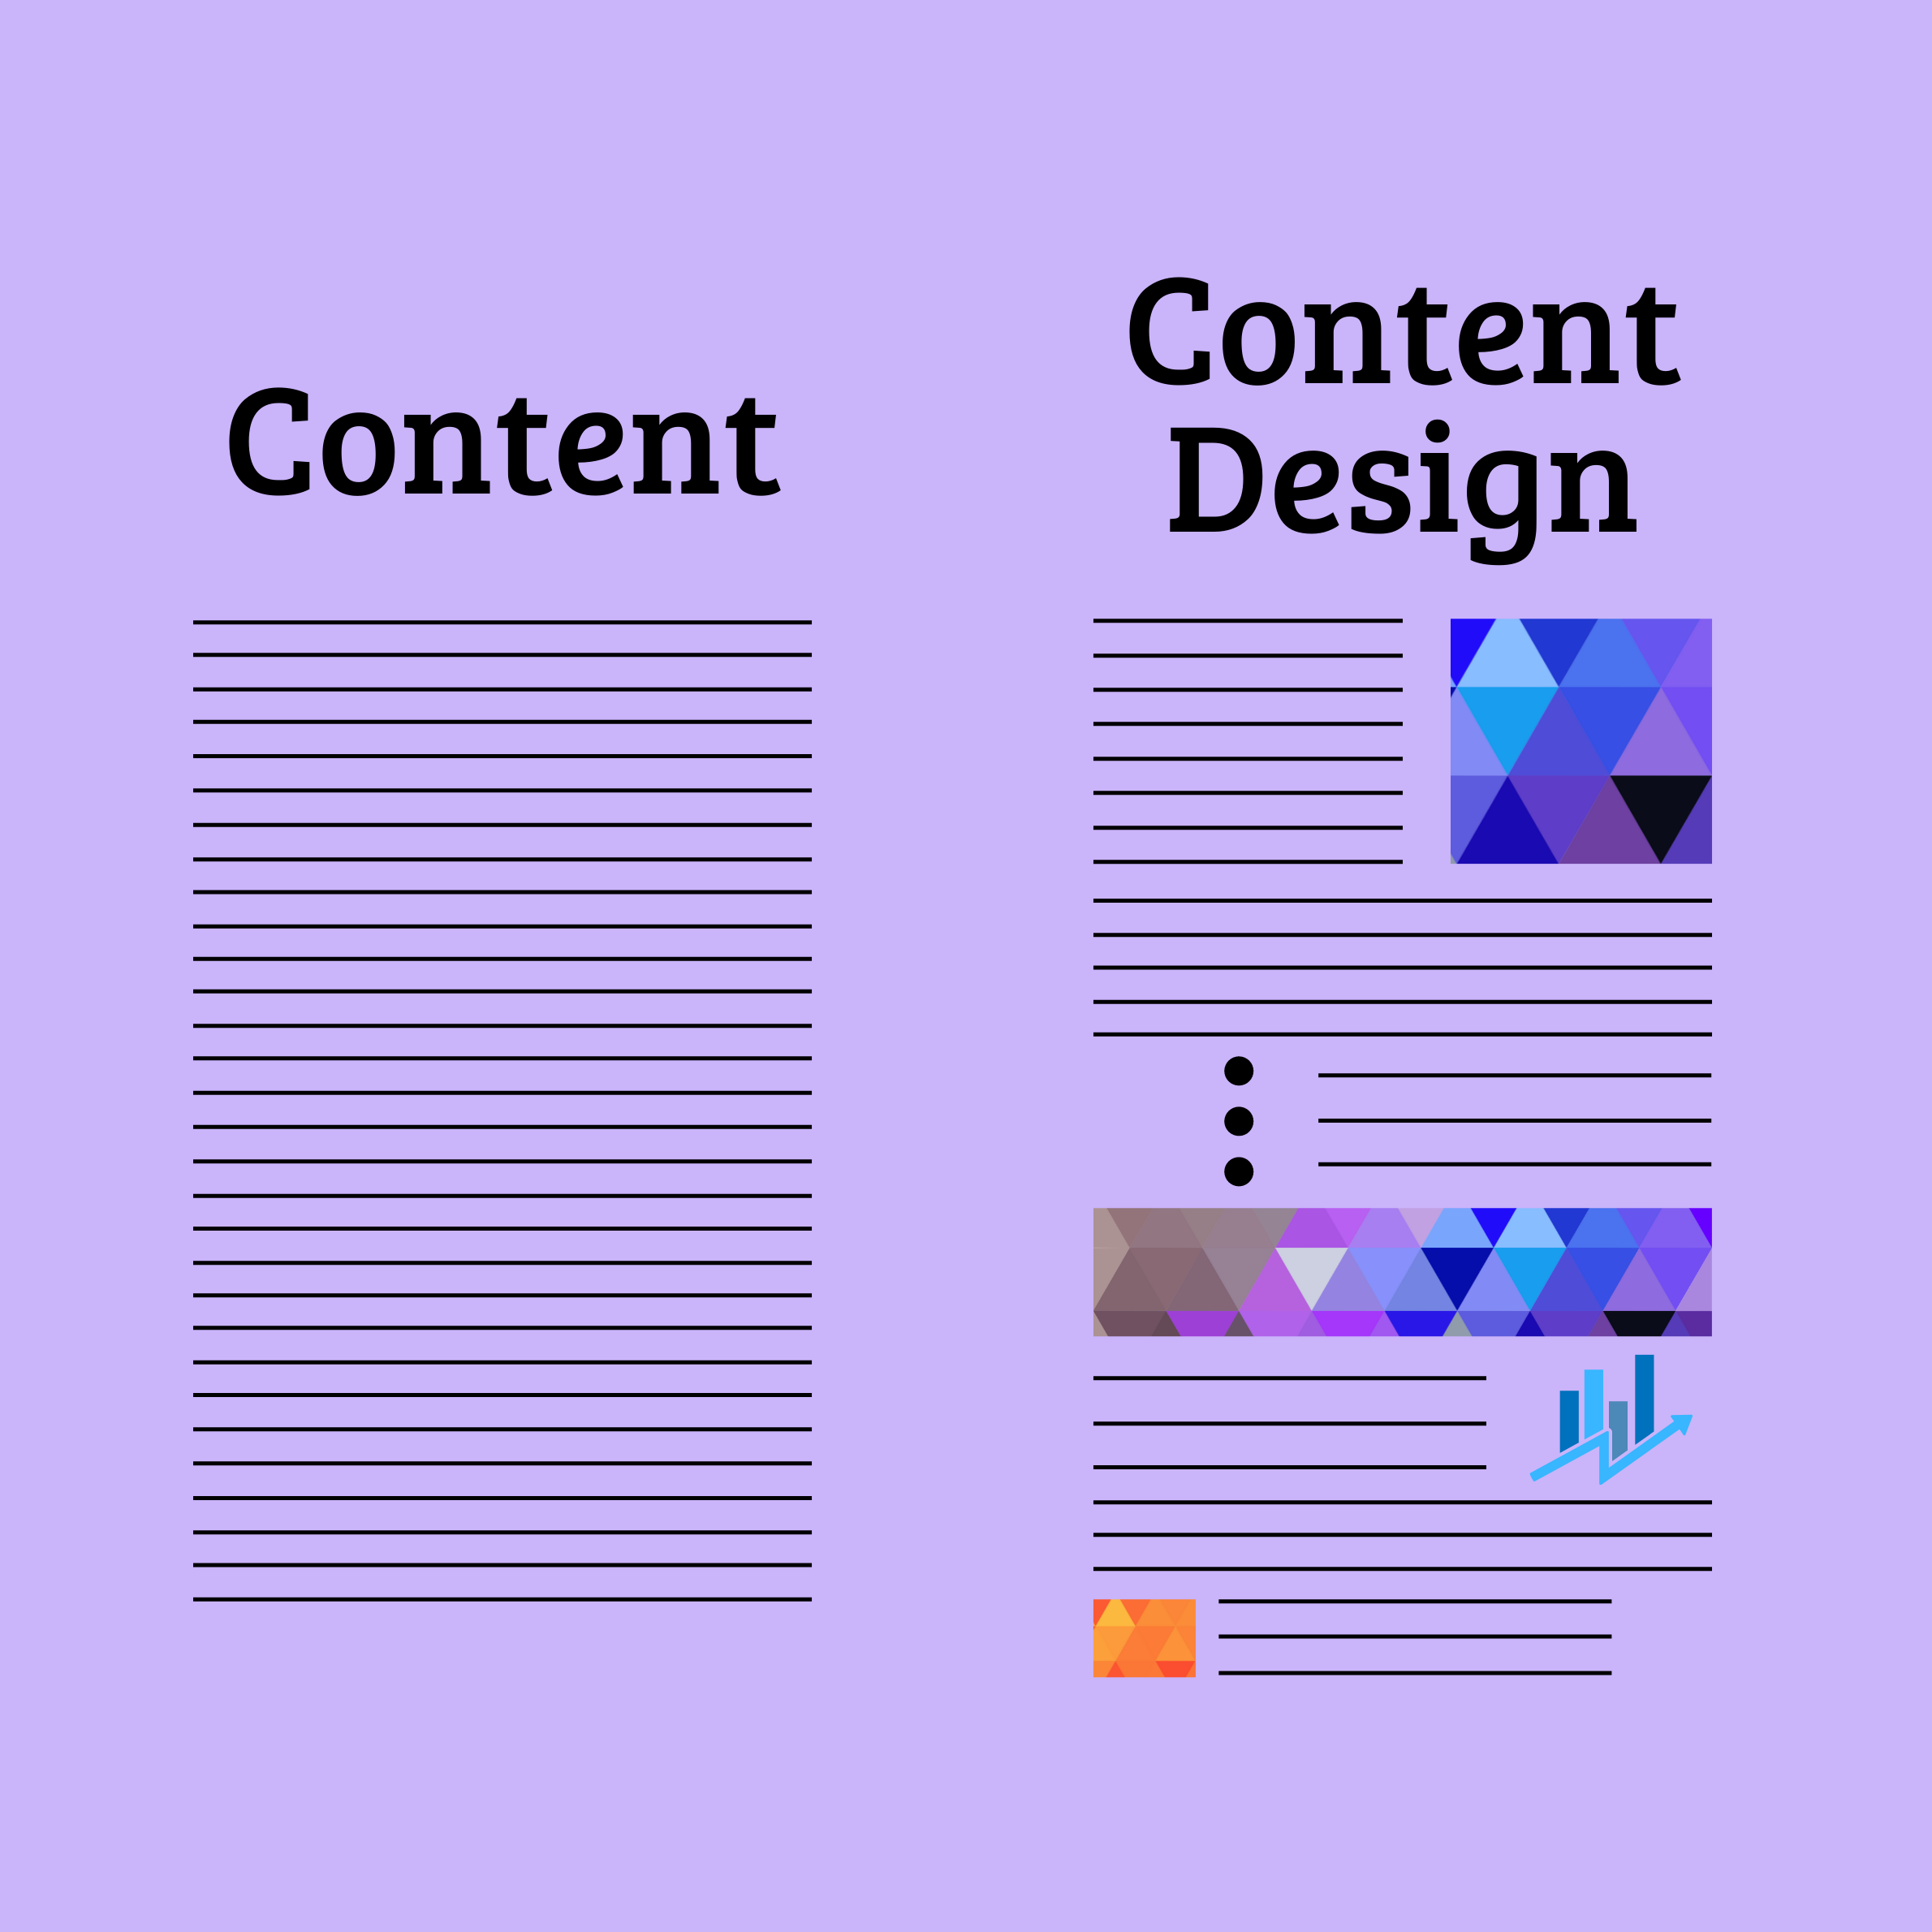 A graphic shows that 'Content' alone includes a block of lines of text, while 'Content Design' shows images, broken up text, bullet points, graphs, and more textual/visual features.